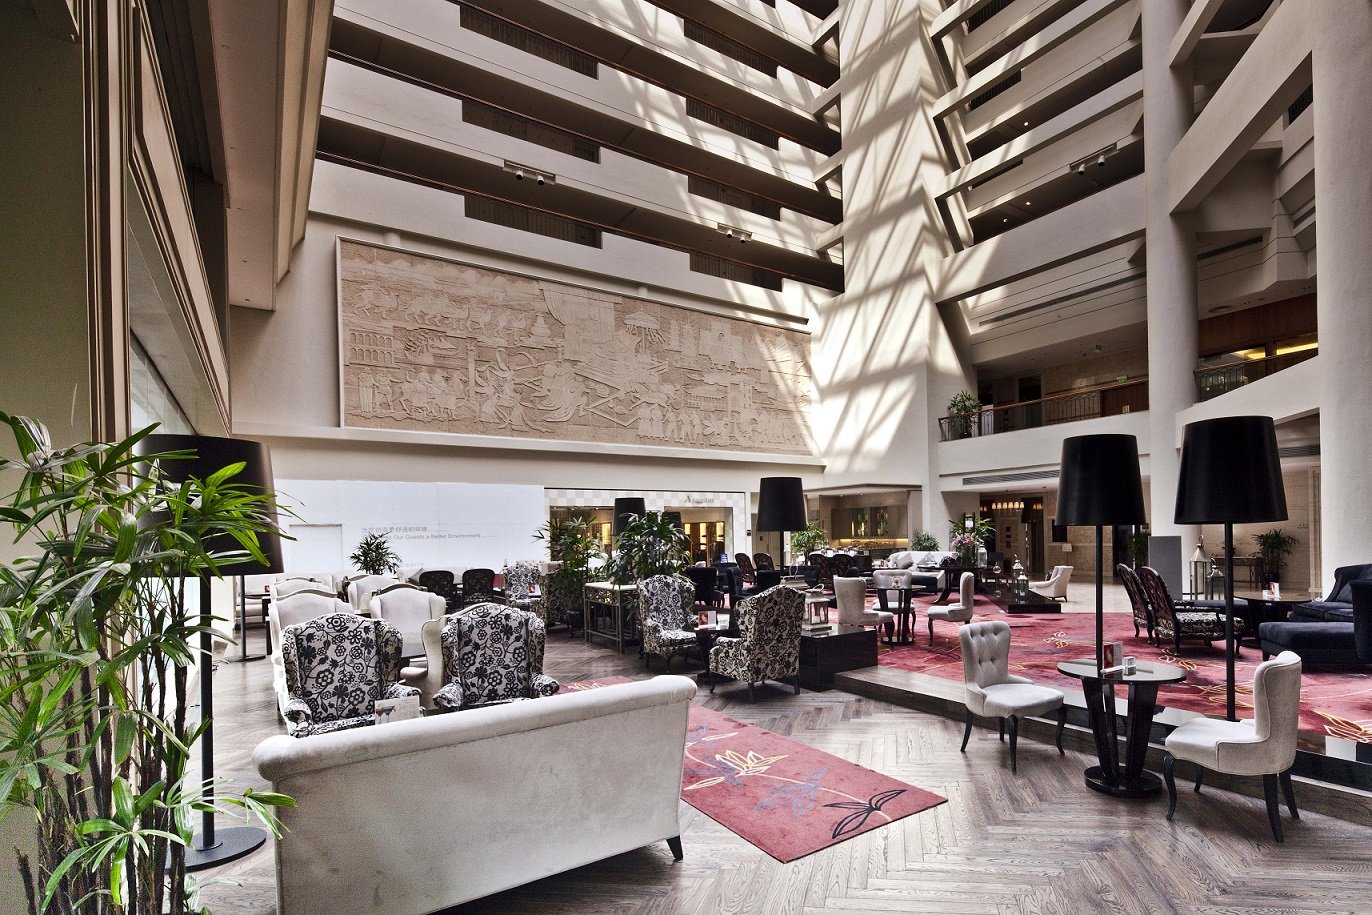 Hotel’s Lobby Lounge serves a broad selection of wines, liquors, signature cocktails and other beverages